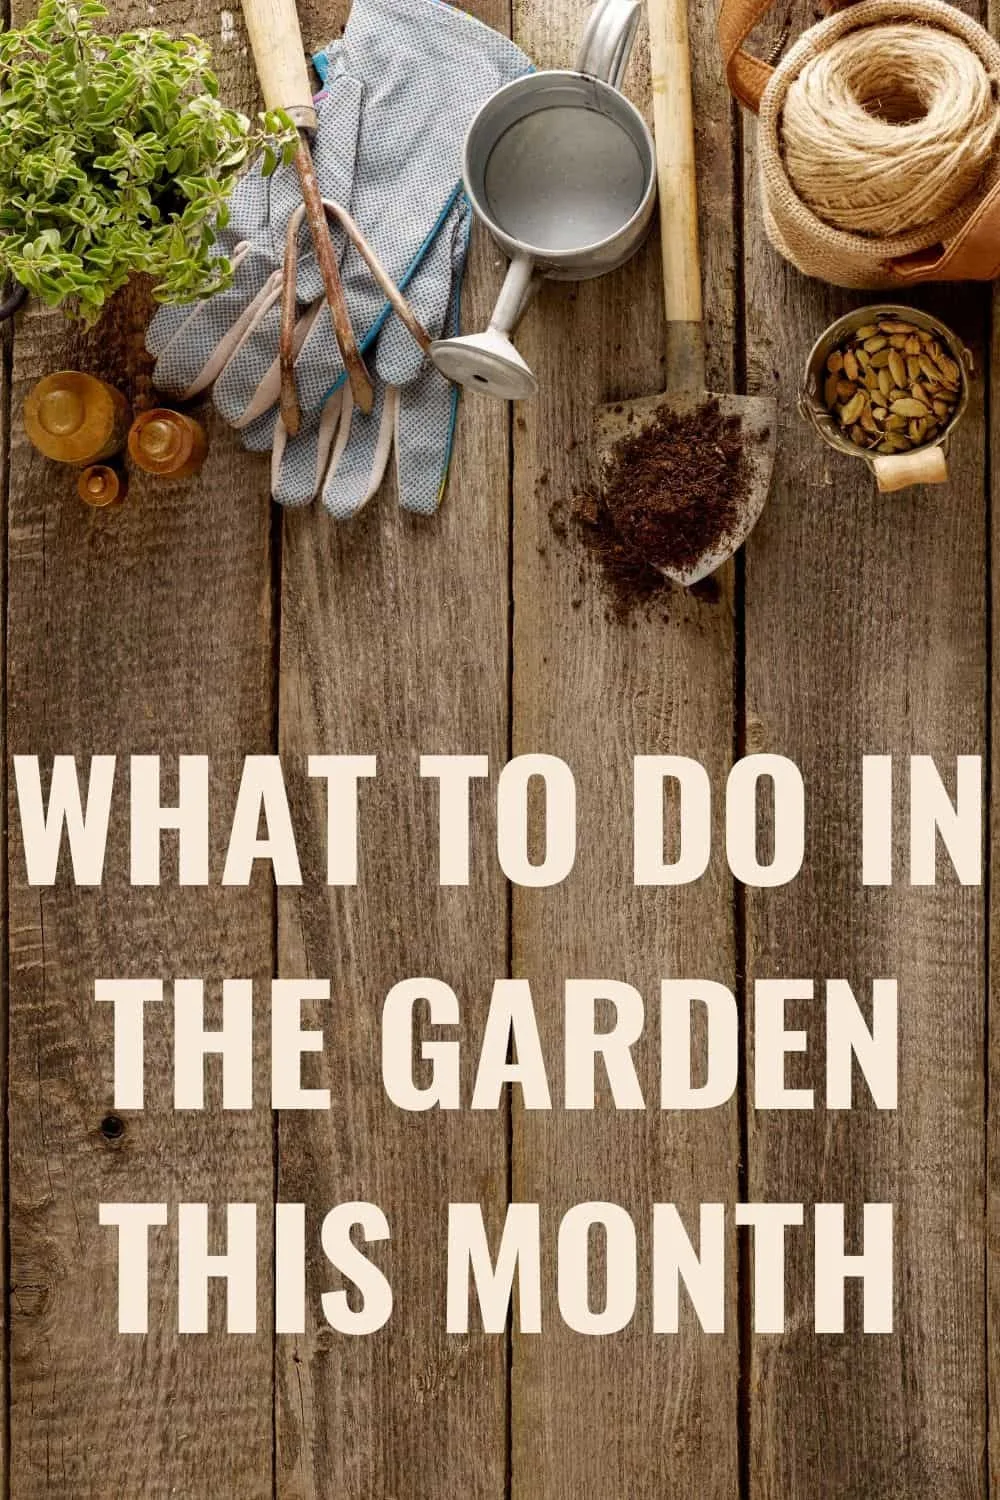 What to do in the garden this month